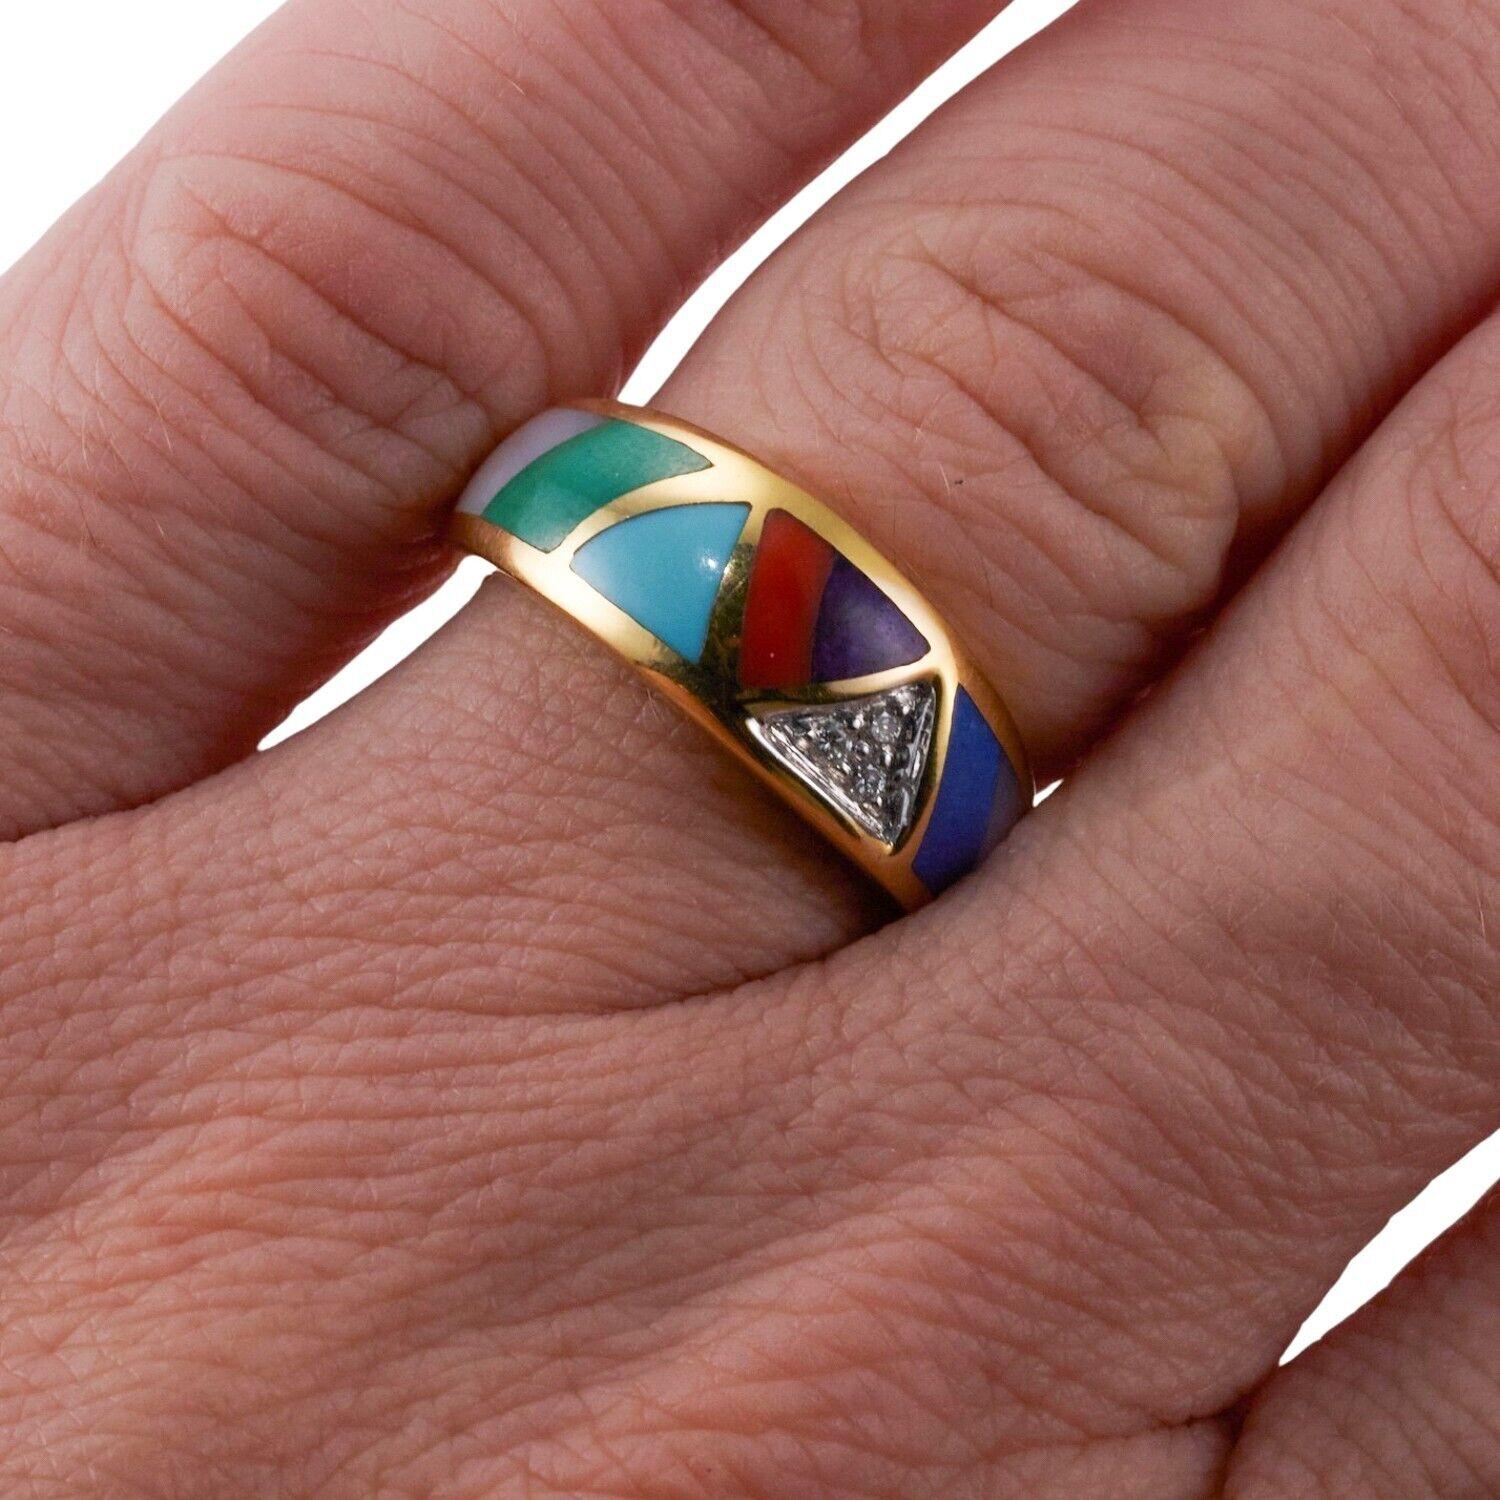 A 14k yellow gold ring set with mother-of-pearl, turquoise, coral, lapis, malachite, purple sugilite, and diamonds. Mother-of-Pearl, Turquoise, Coral, Lapis, Malachite, Purple Sugilite, Diamonds - approx. 0.03ctw. 5 grams.